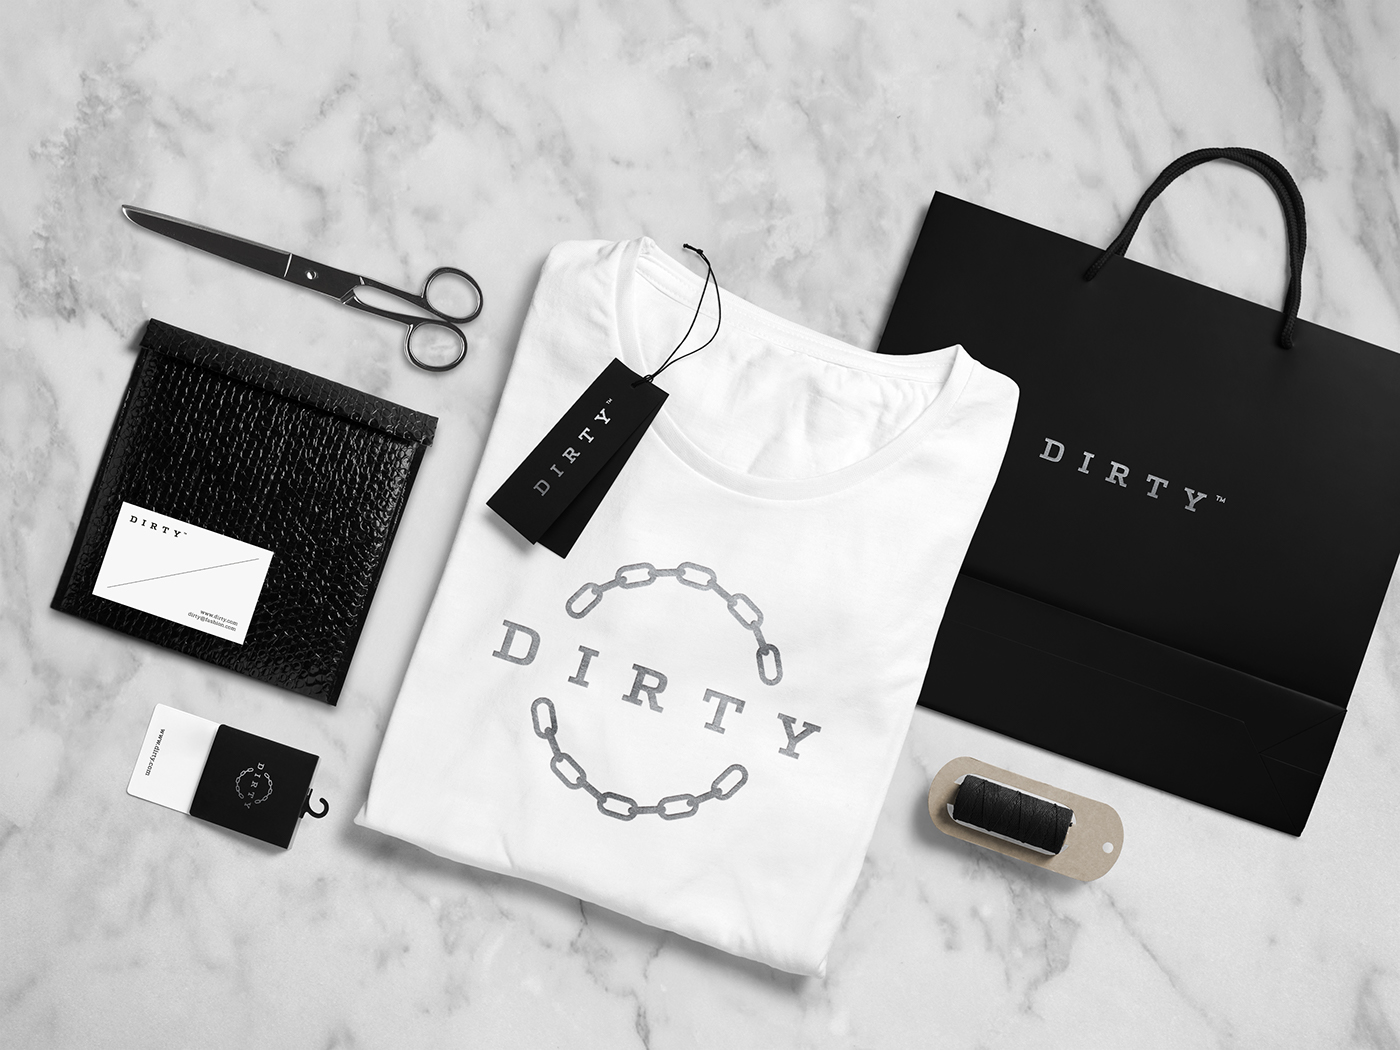 fashion brand shop wear clothes black White letters silver print identity Street logo brand corporate passion